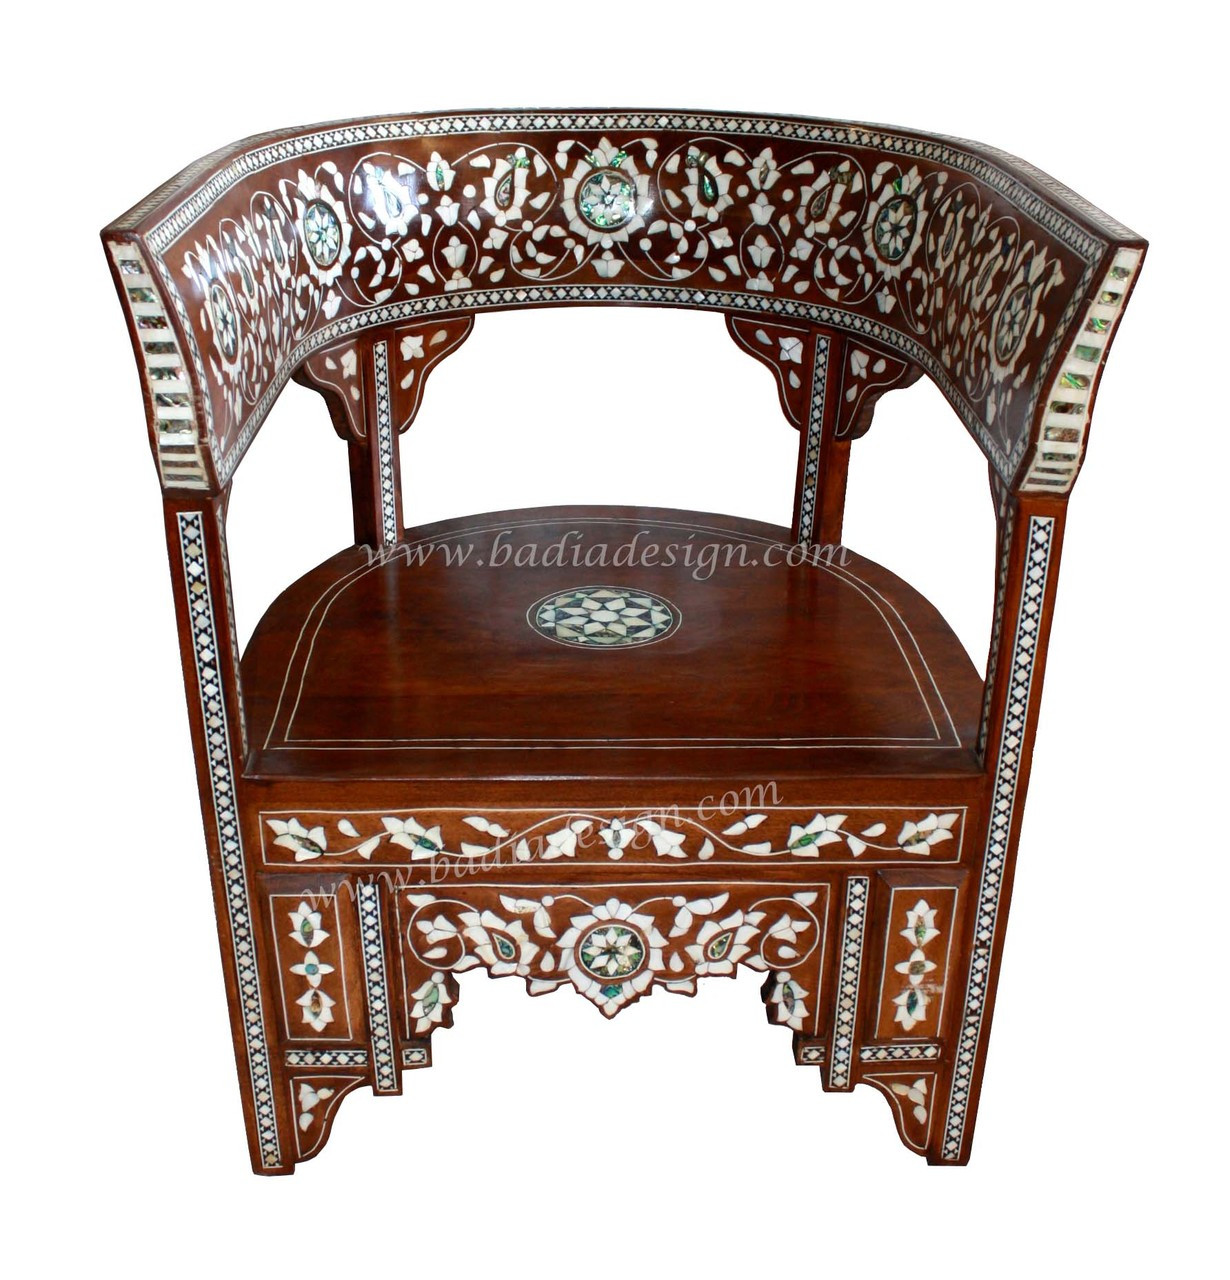 Moroccan Mother Of Pearl Inlaid Handcrafted Chair From Badia